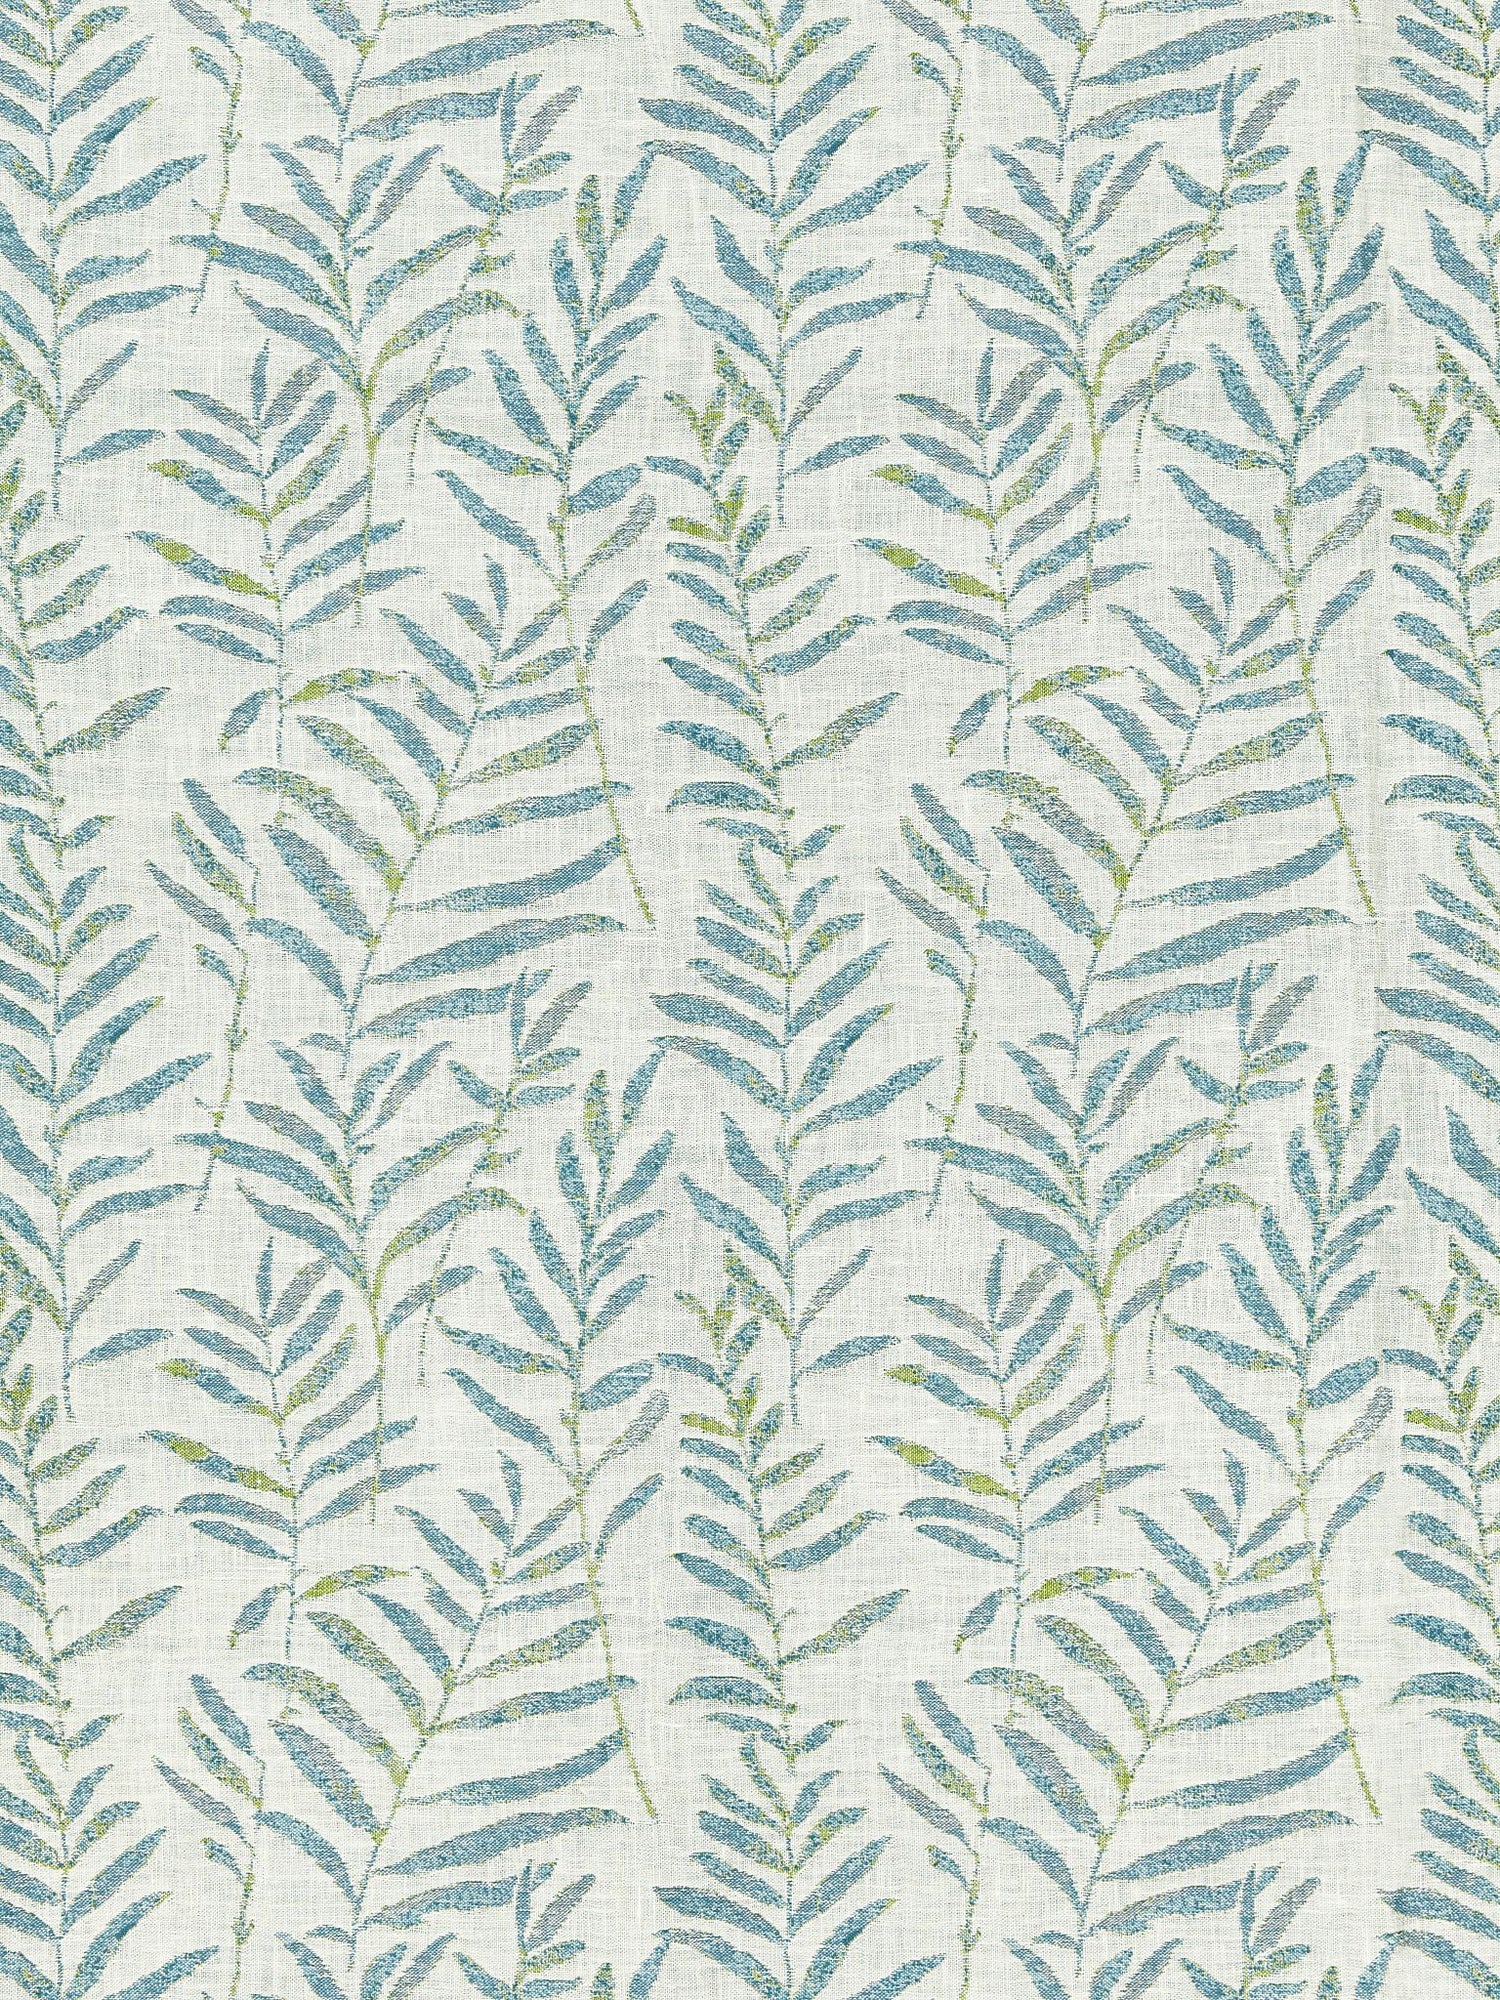 Willow Weave fabric in seagrass color - pattern number GW 000327211 - by Scalamandre in the Grey Watkins collection